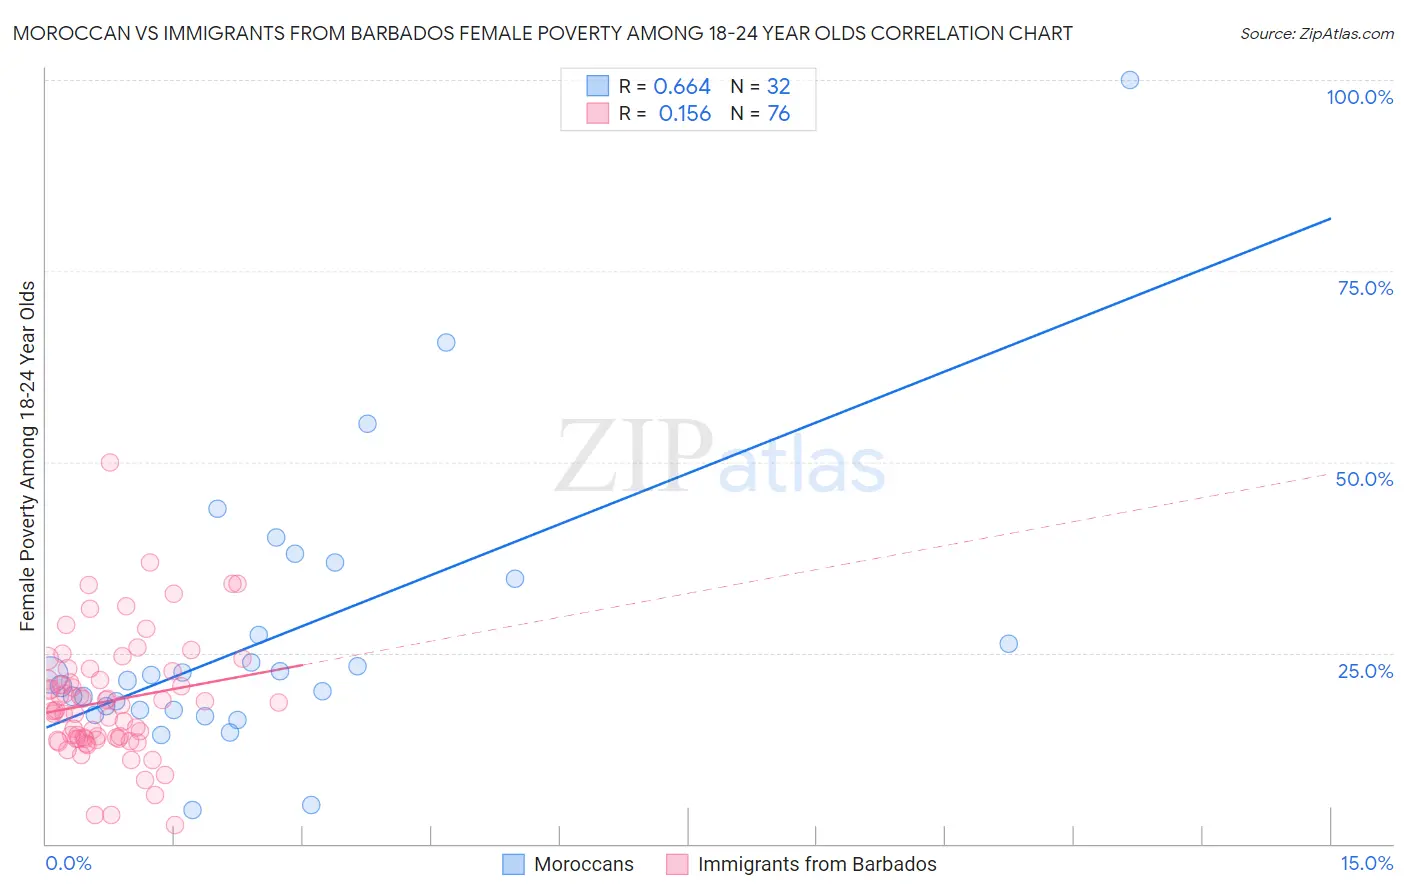 Moroccan vs Immigrants from Barbados Female Poverty Among 18-24 Year Olds